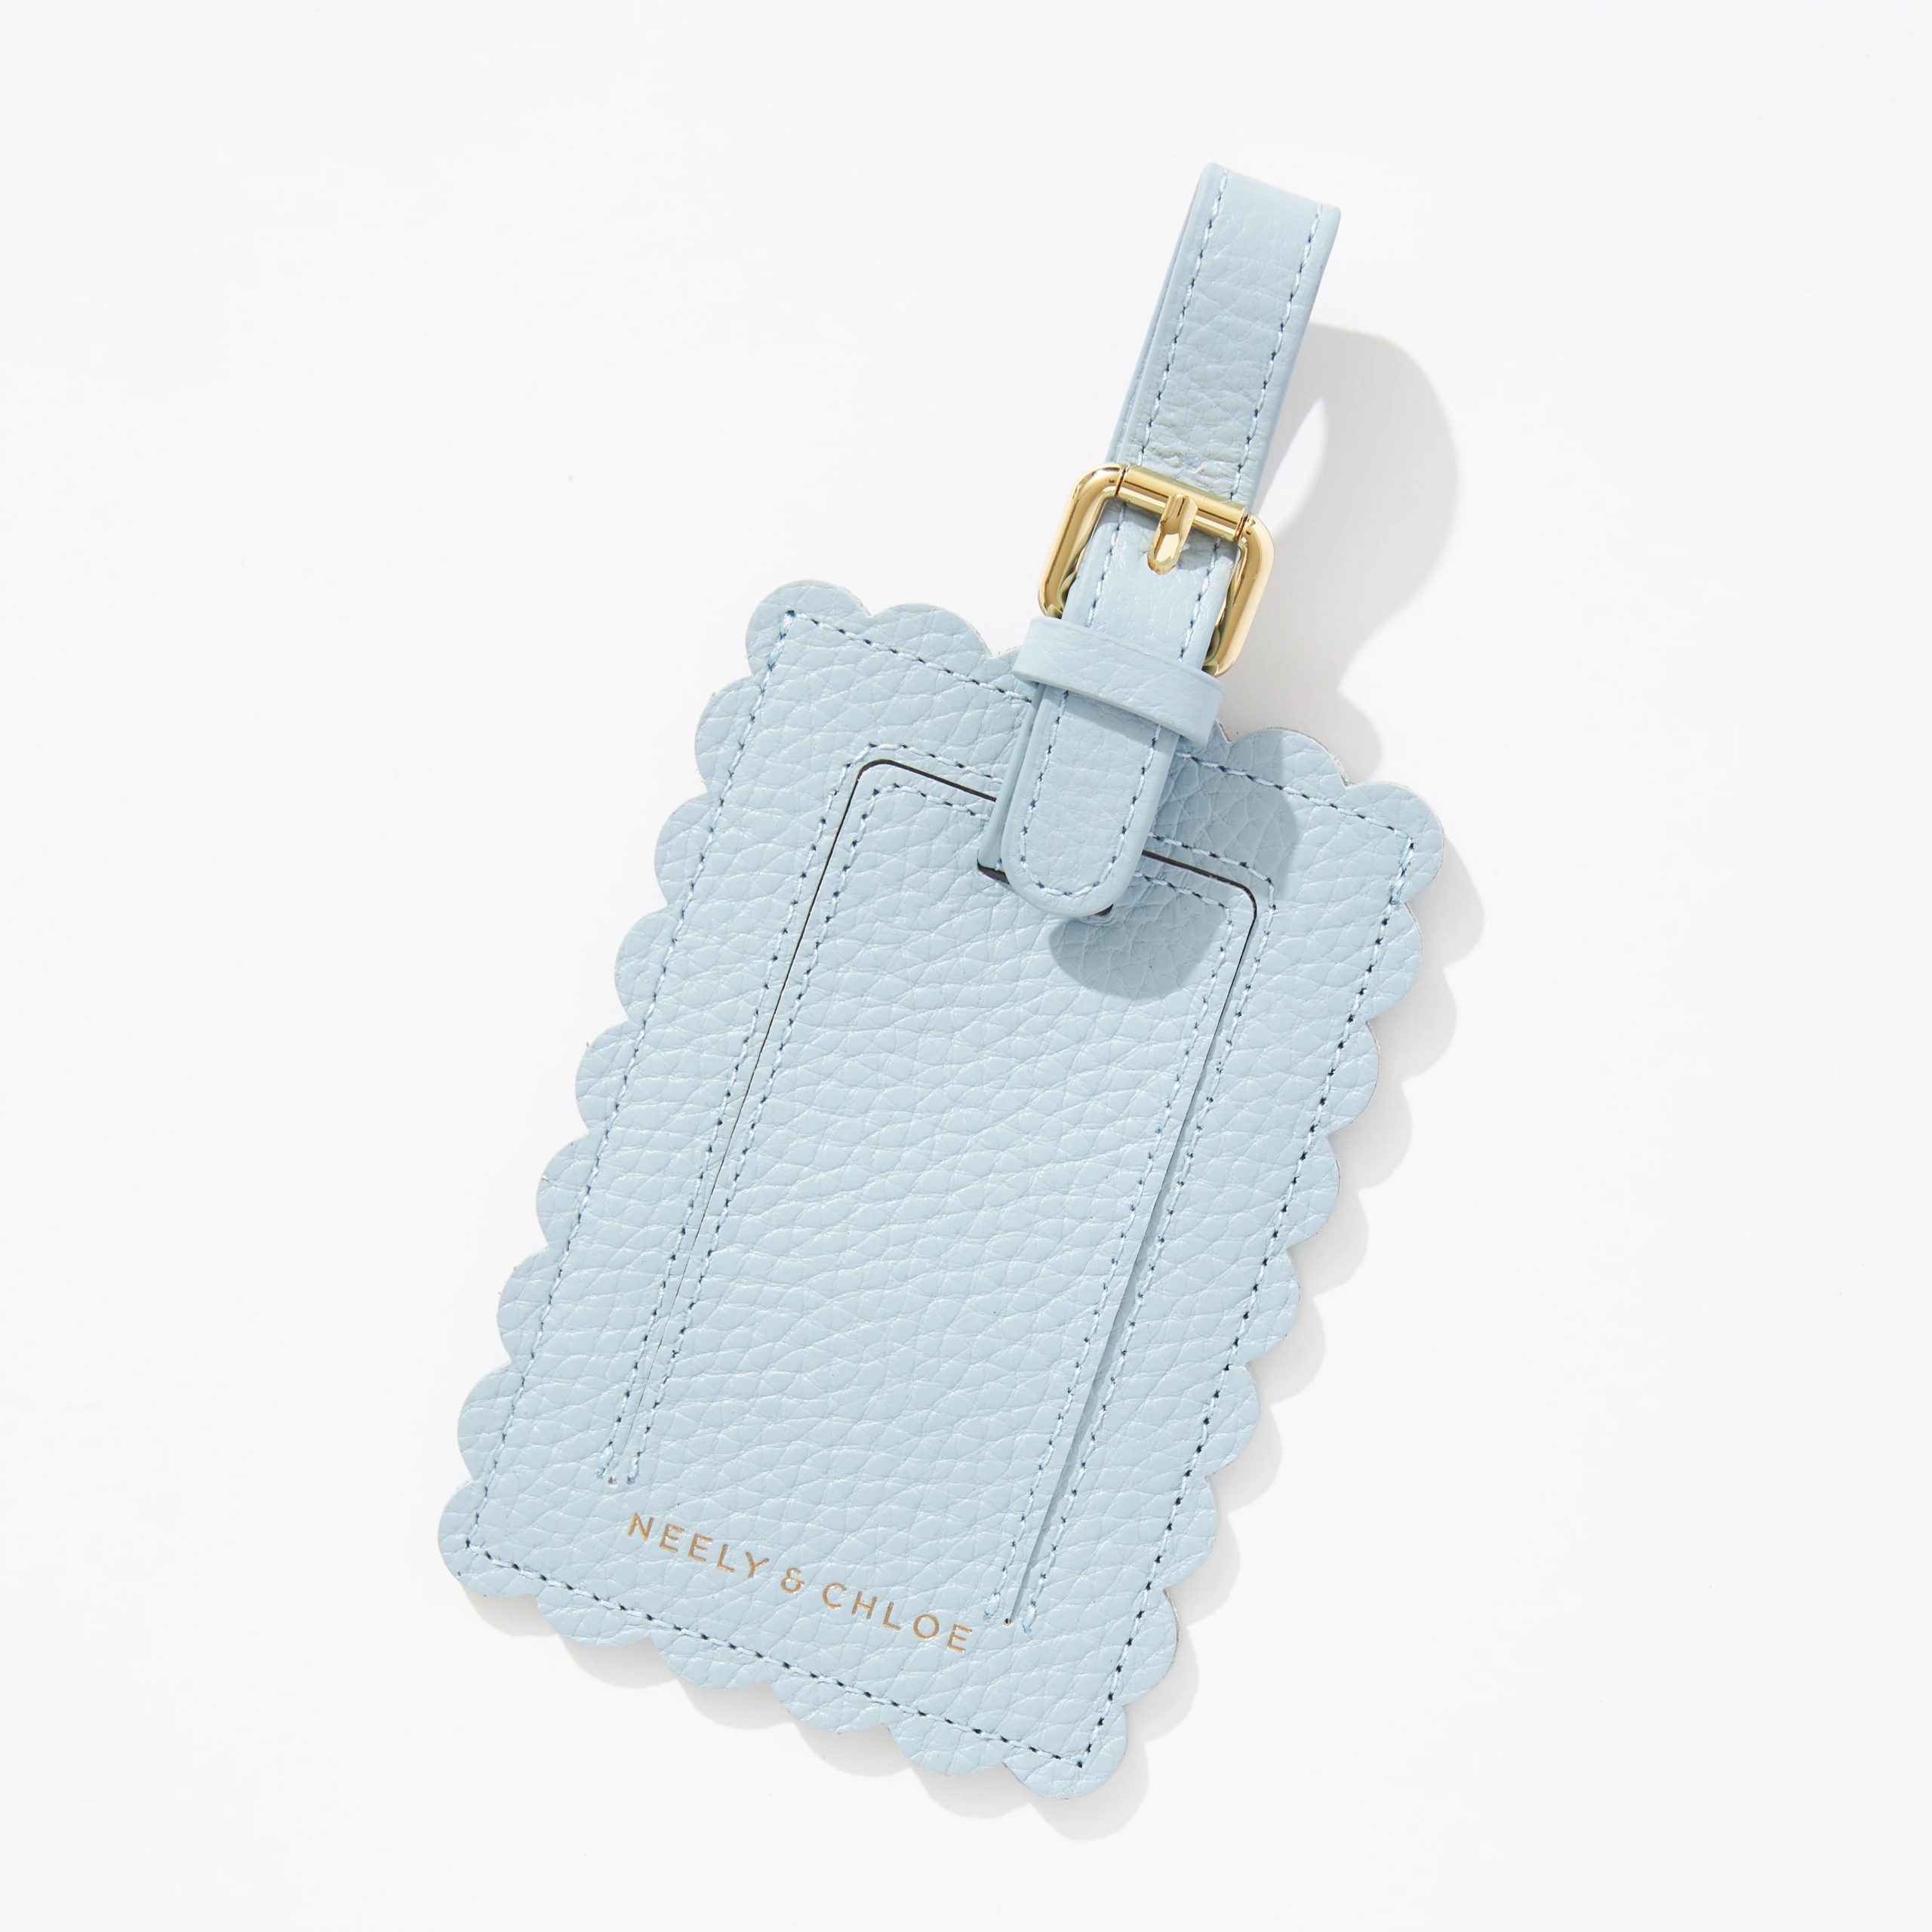 Scallop Luggage Tag from Neely & Chloe